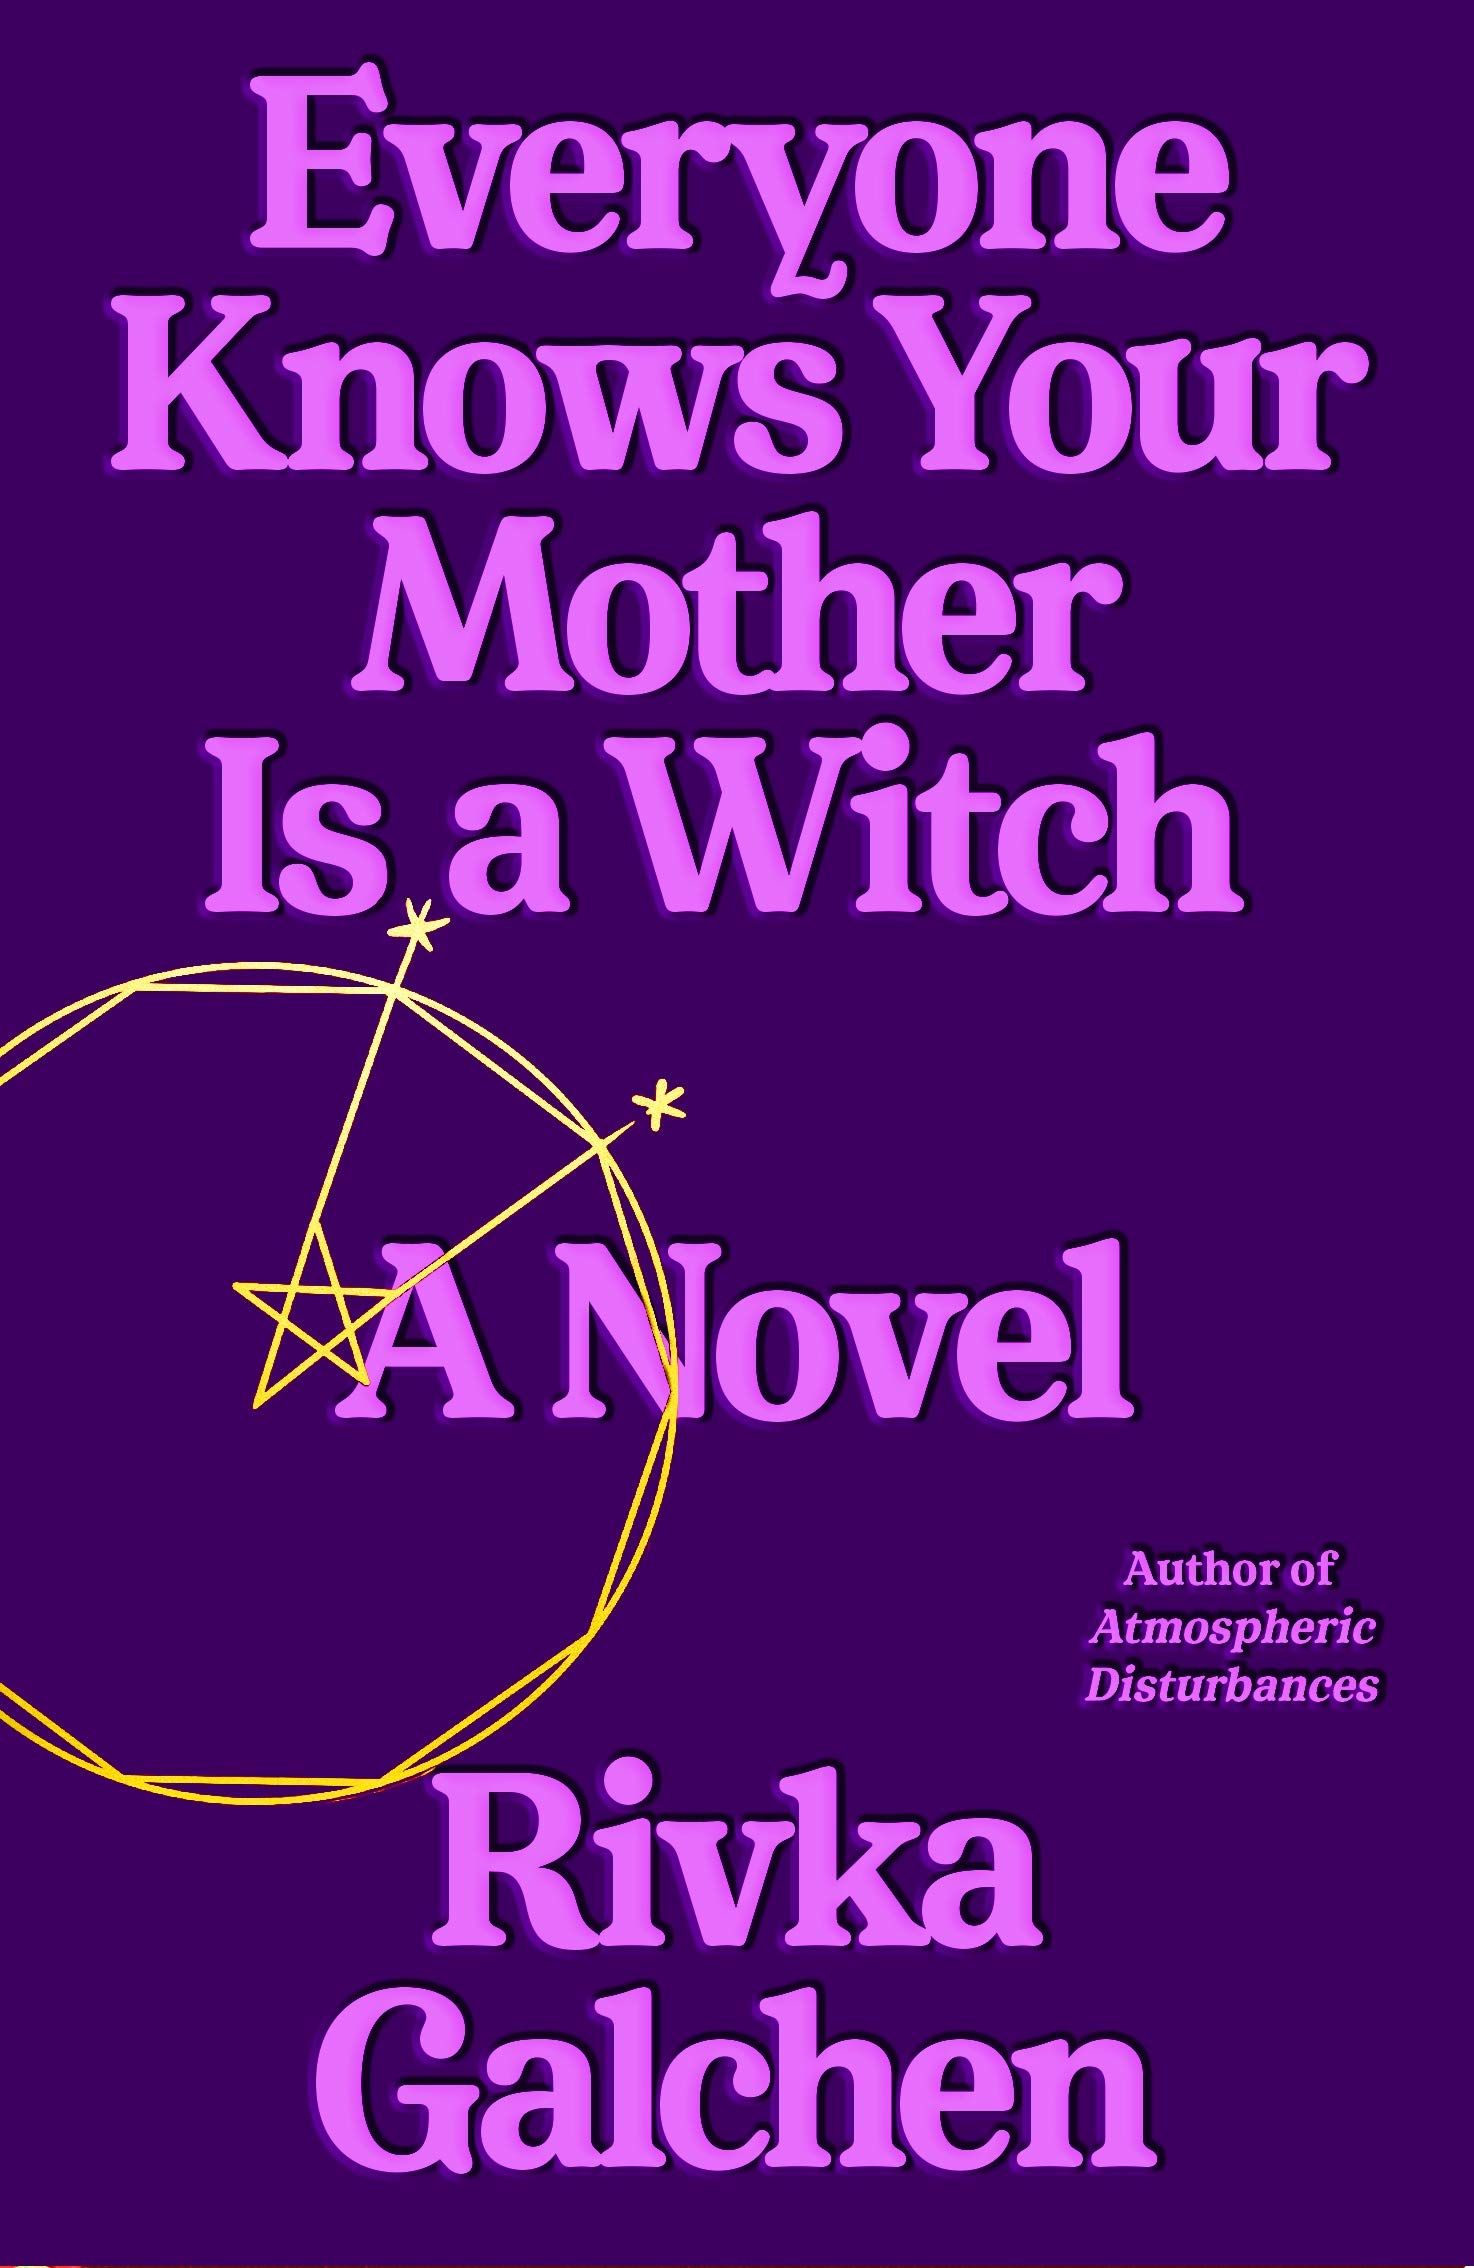 Cover of Everyone Knows Your Mother is a Witch